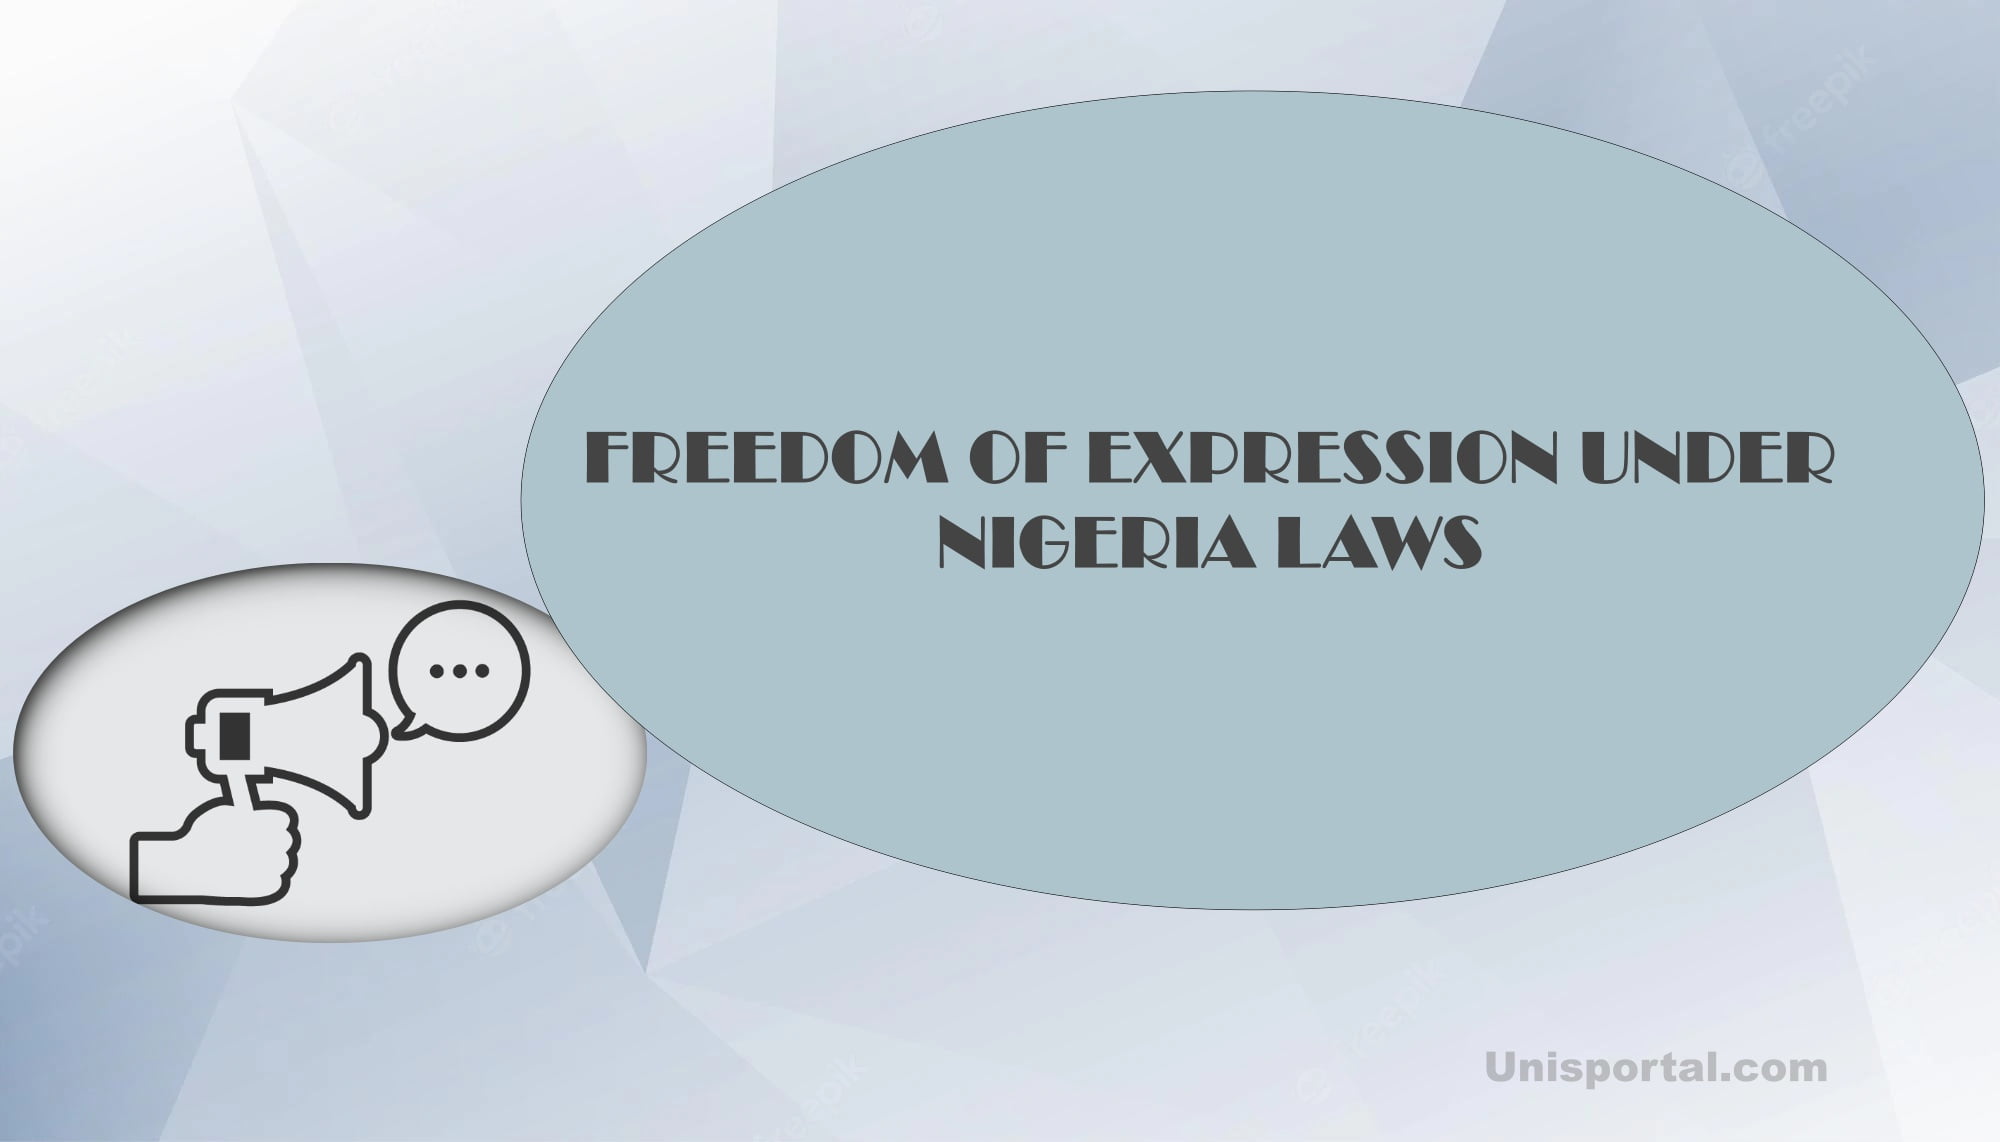 Image of Freedom of Expression